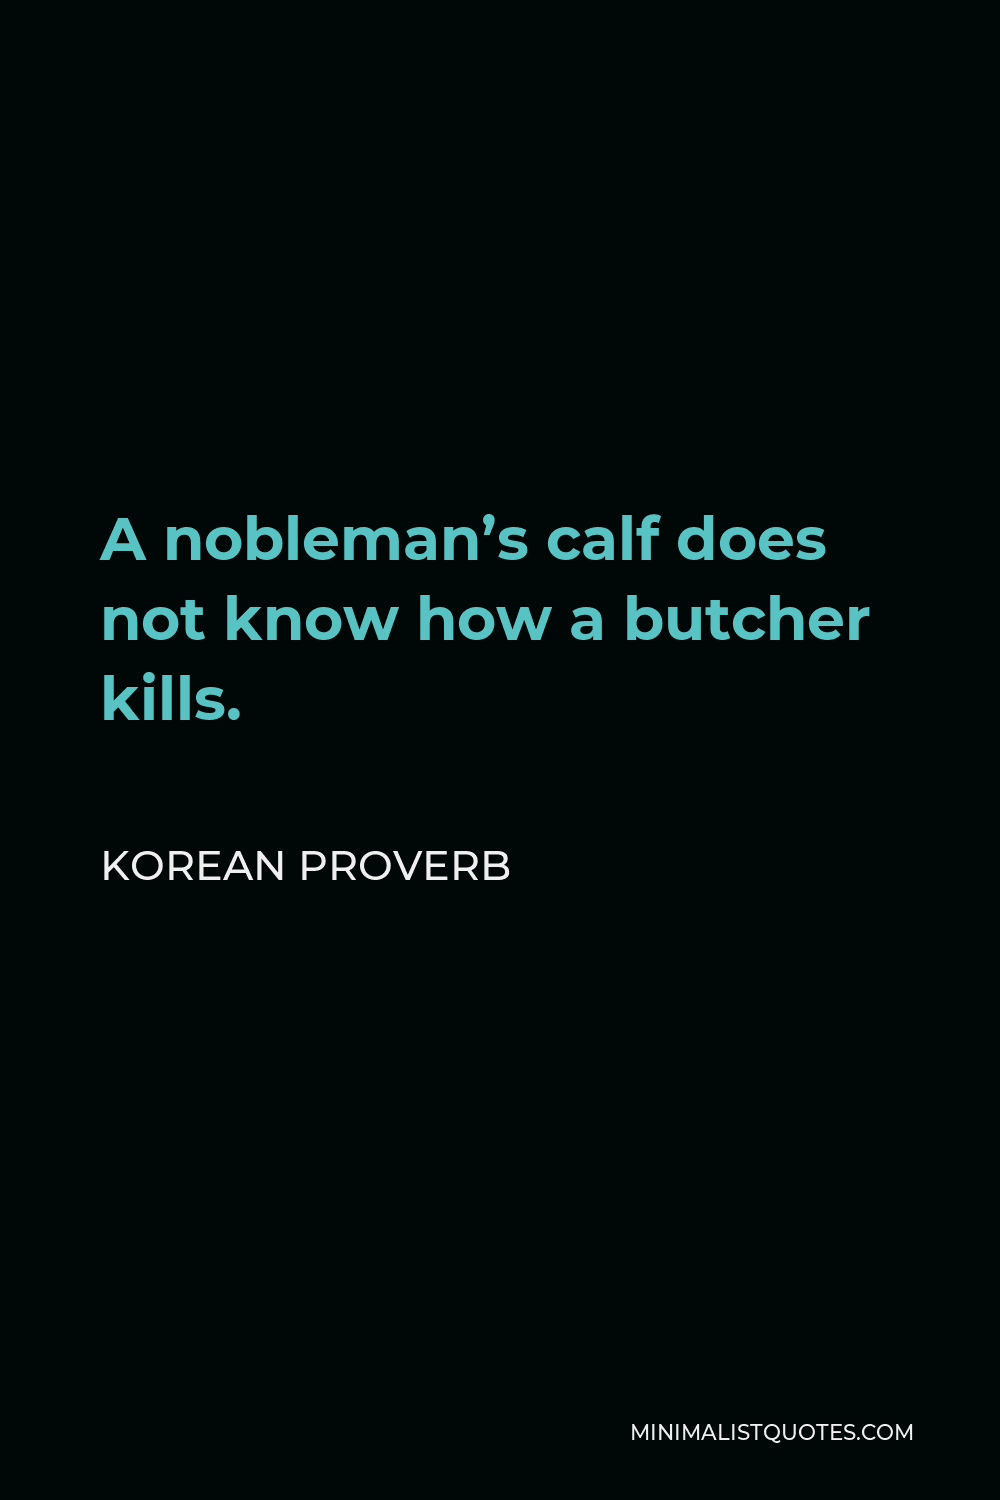 Korean Proverb Quote - A nobleman’s calf does not know how a butcher kills.